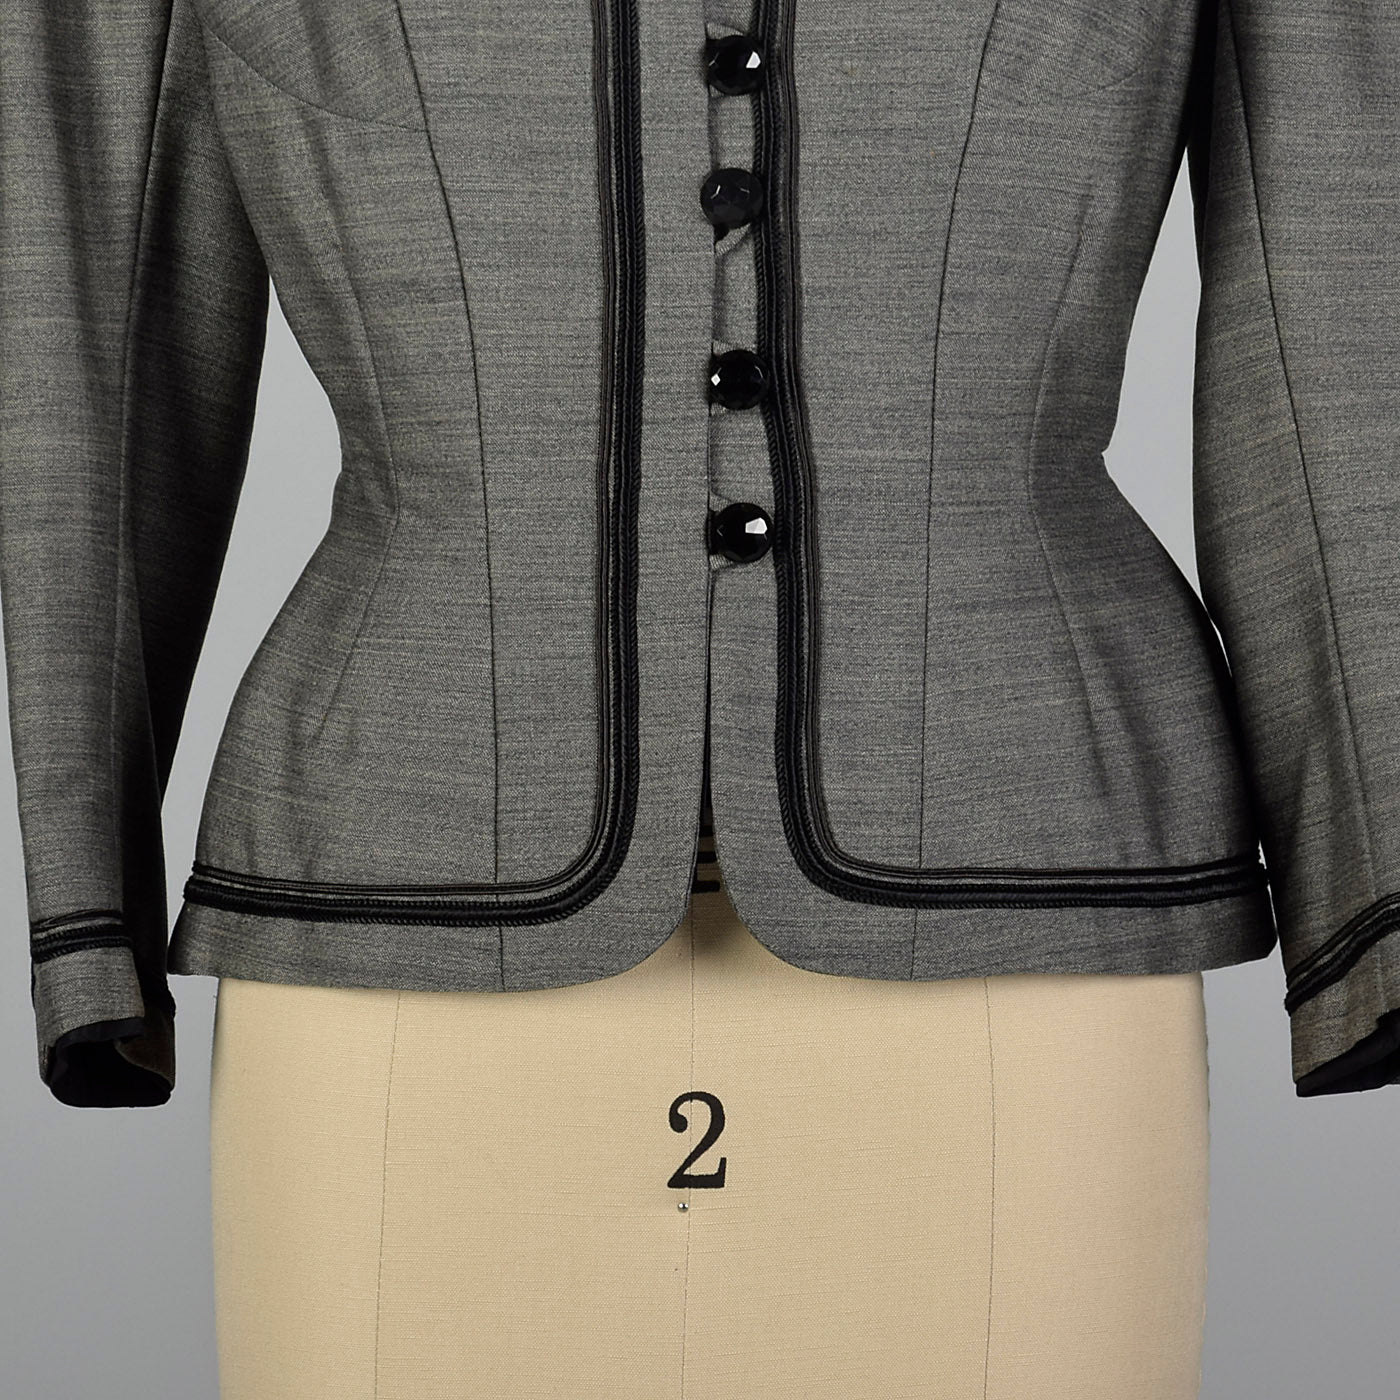 1950s Bonwit Teller Gray Fitted Blazer with Black Trim